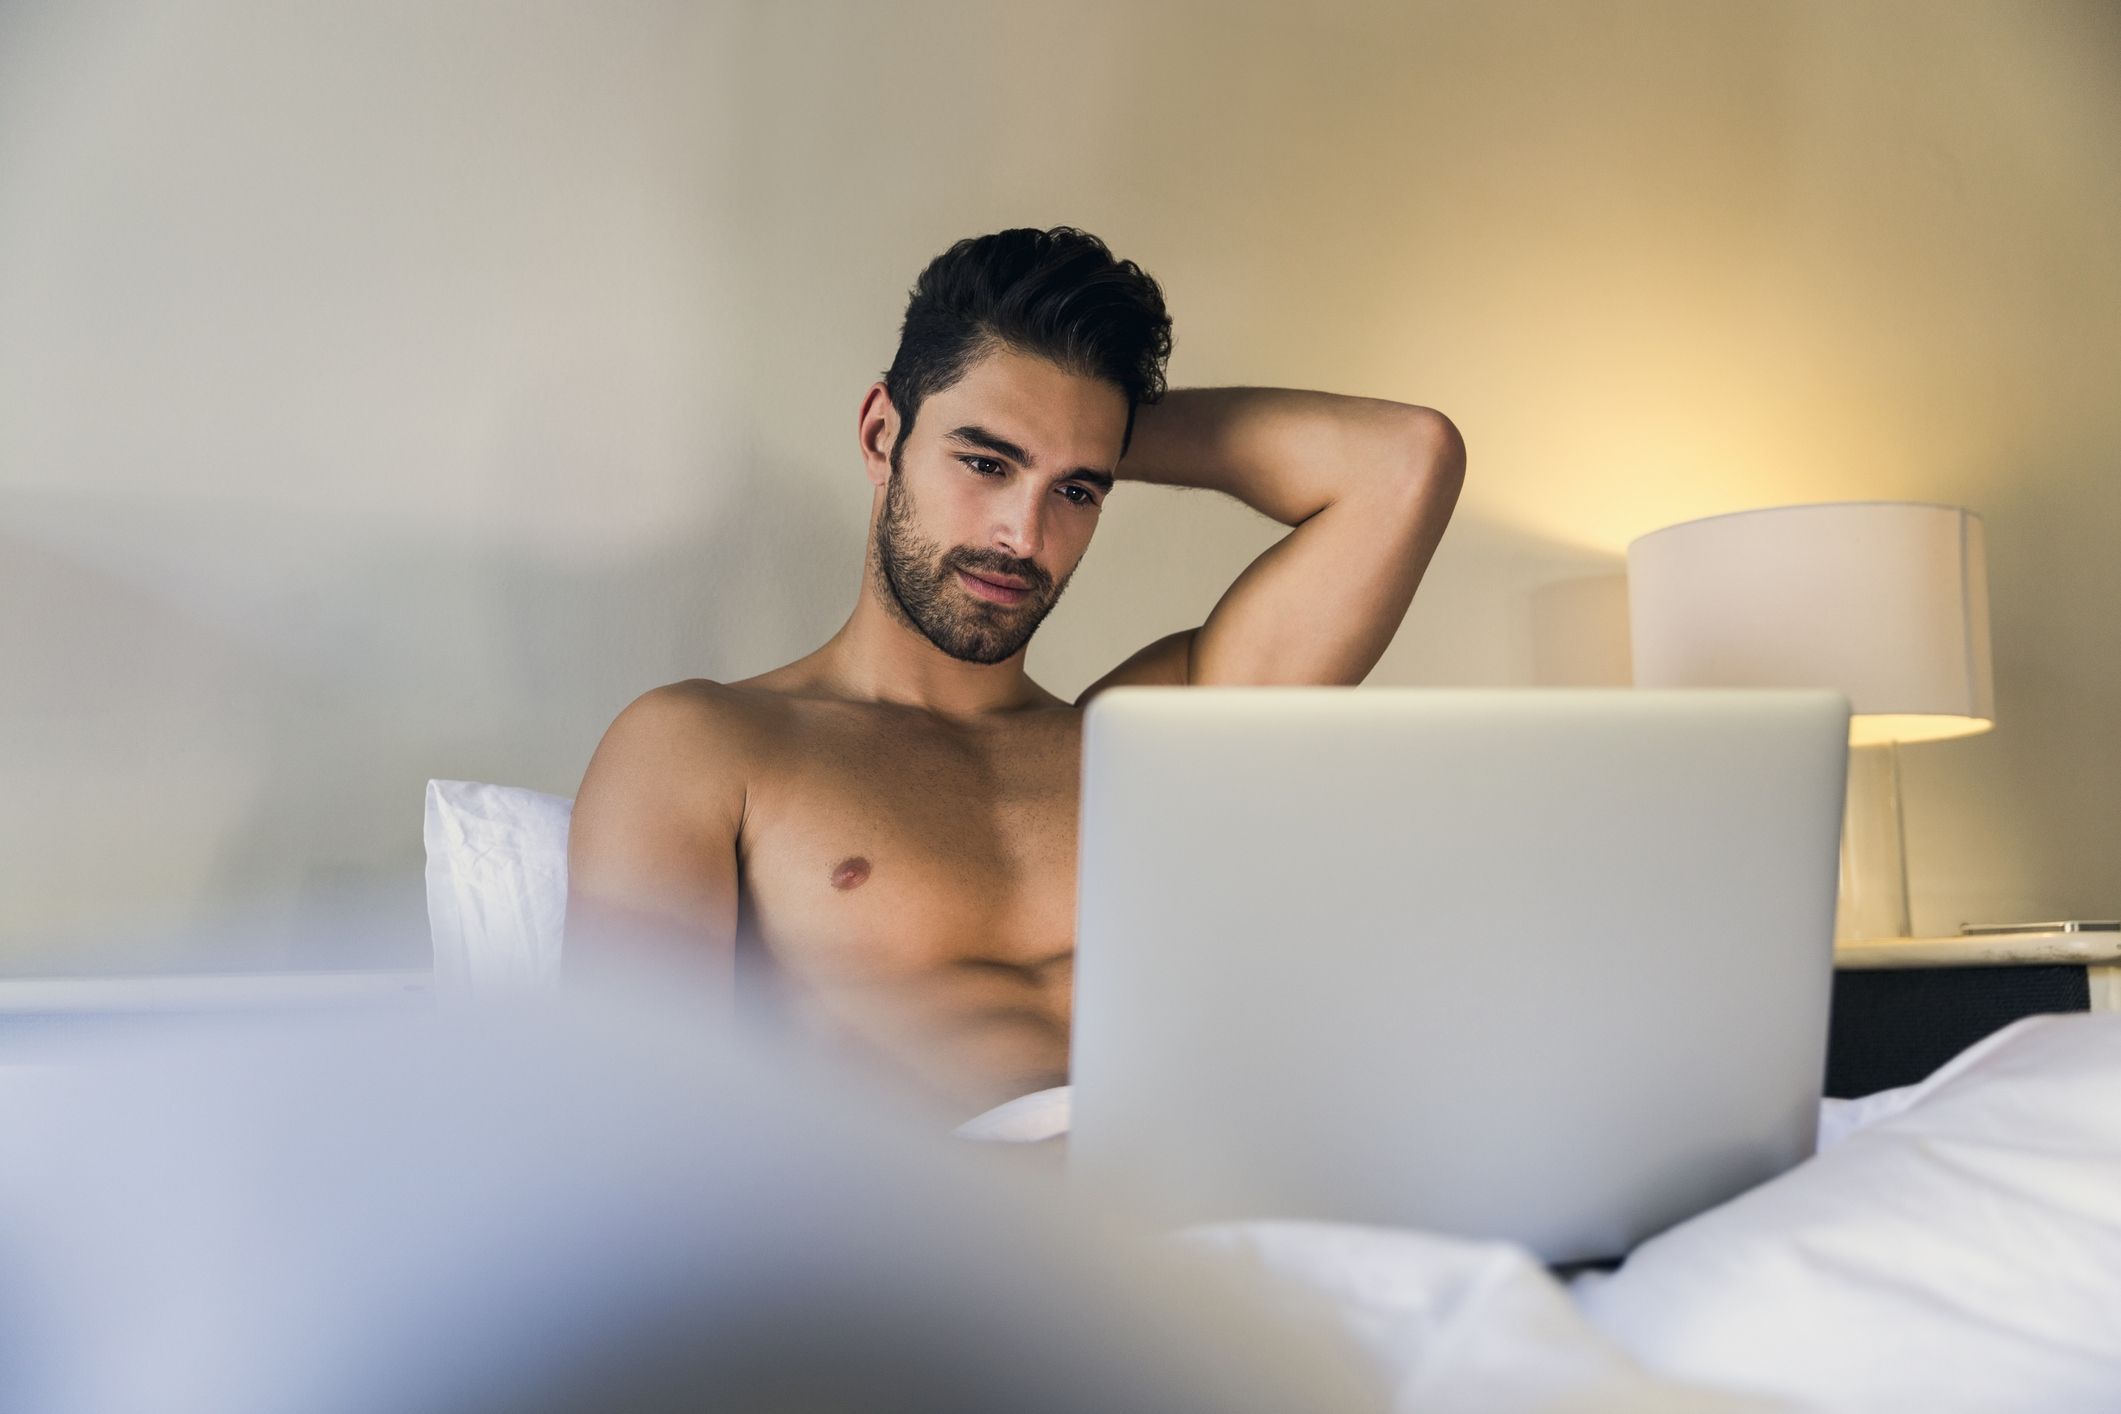 Xxx Image Pdf Downloads - How to Browse Porn Sites Safely Without Getting Hacked